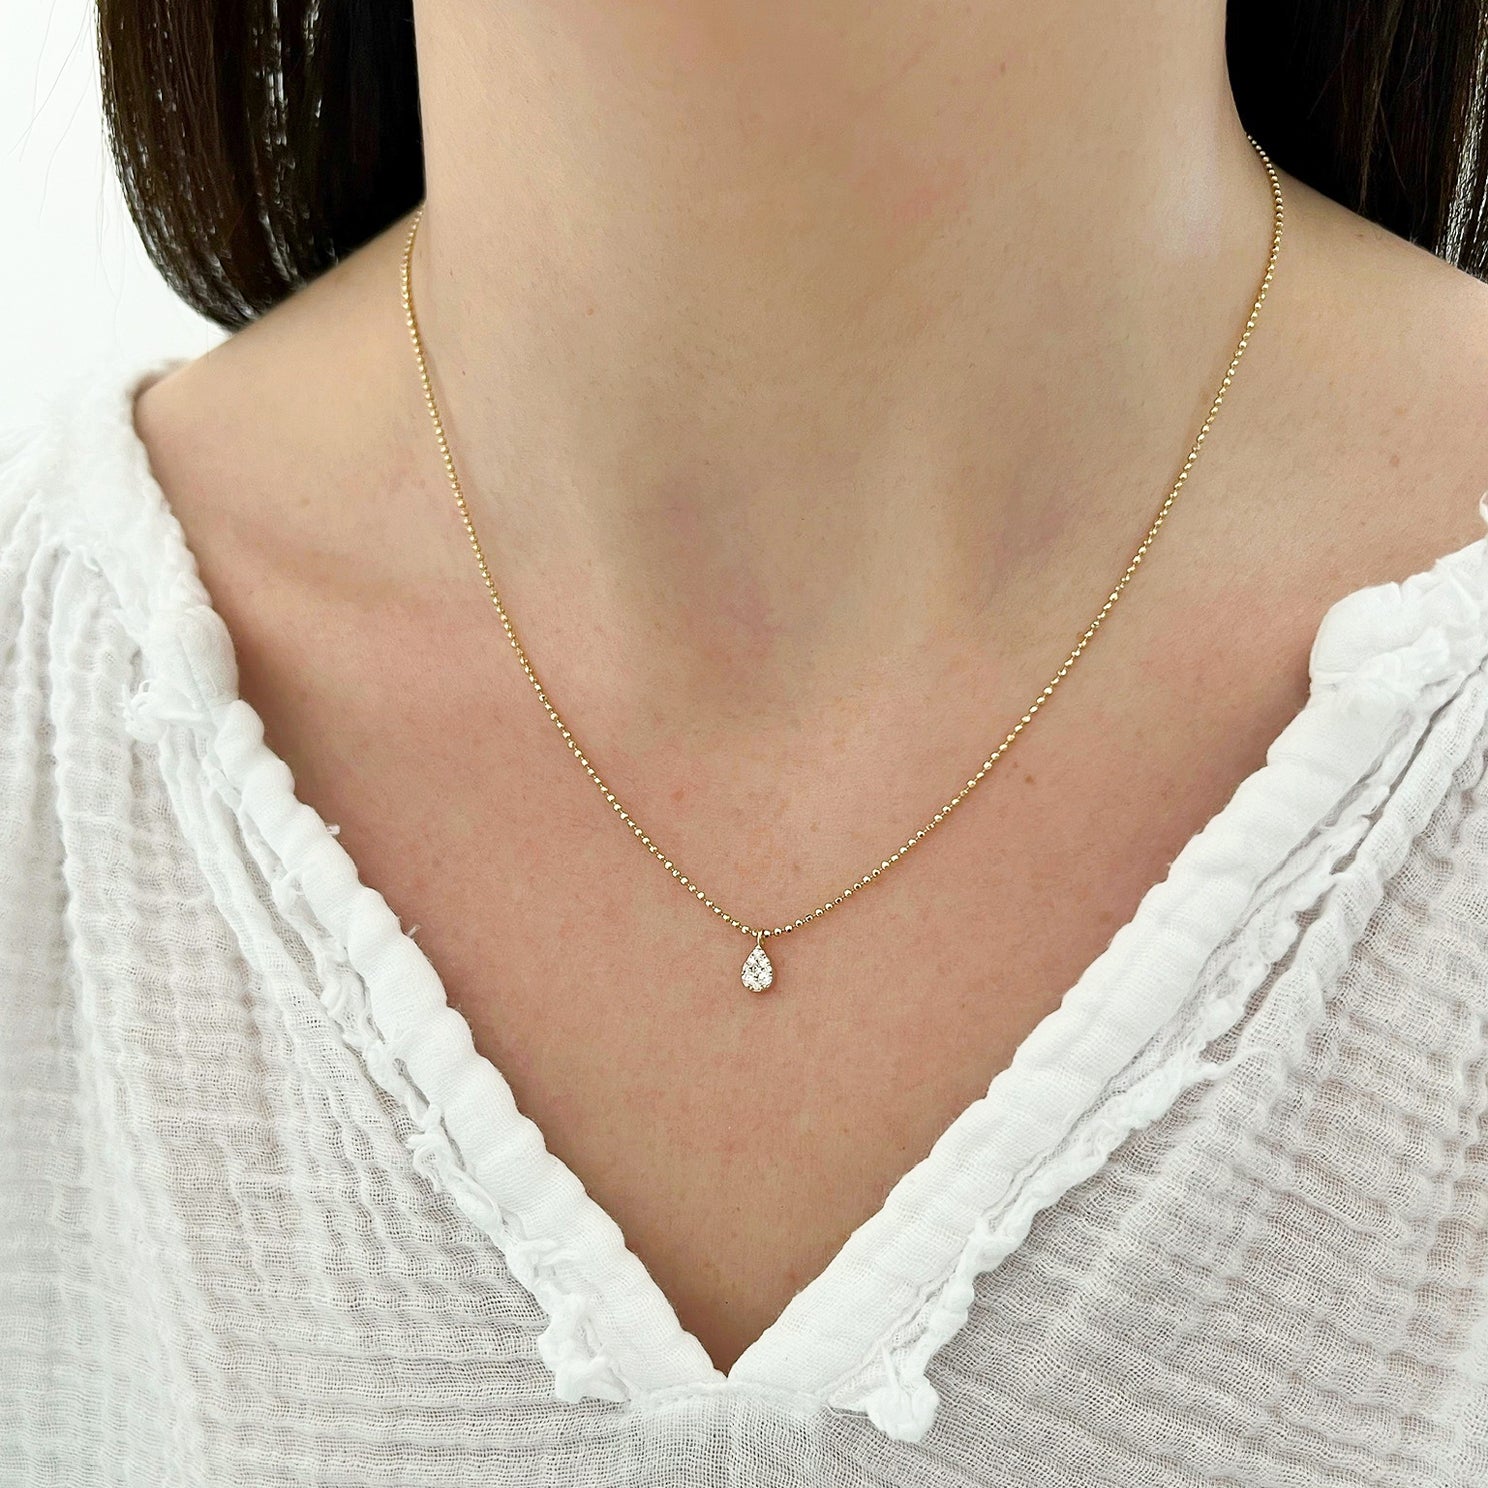 Full Cut Diamond Teardrop Necklace in 14k yellow gold styled on neck of model wearing white blouse